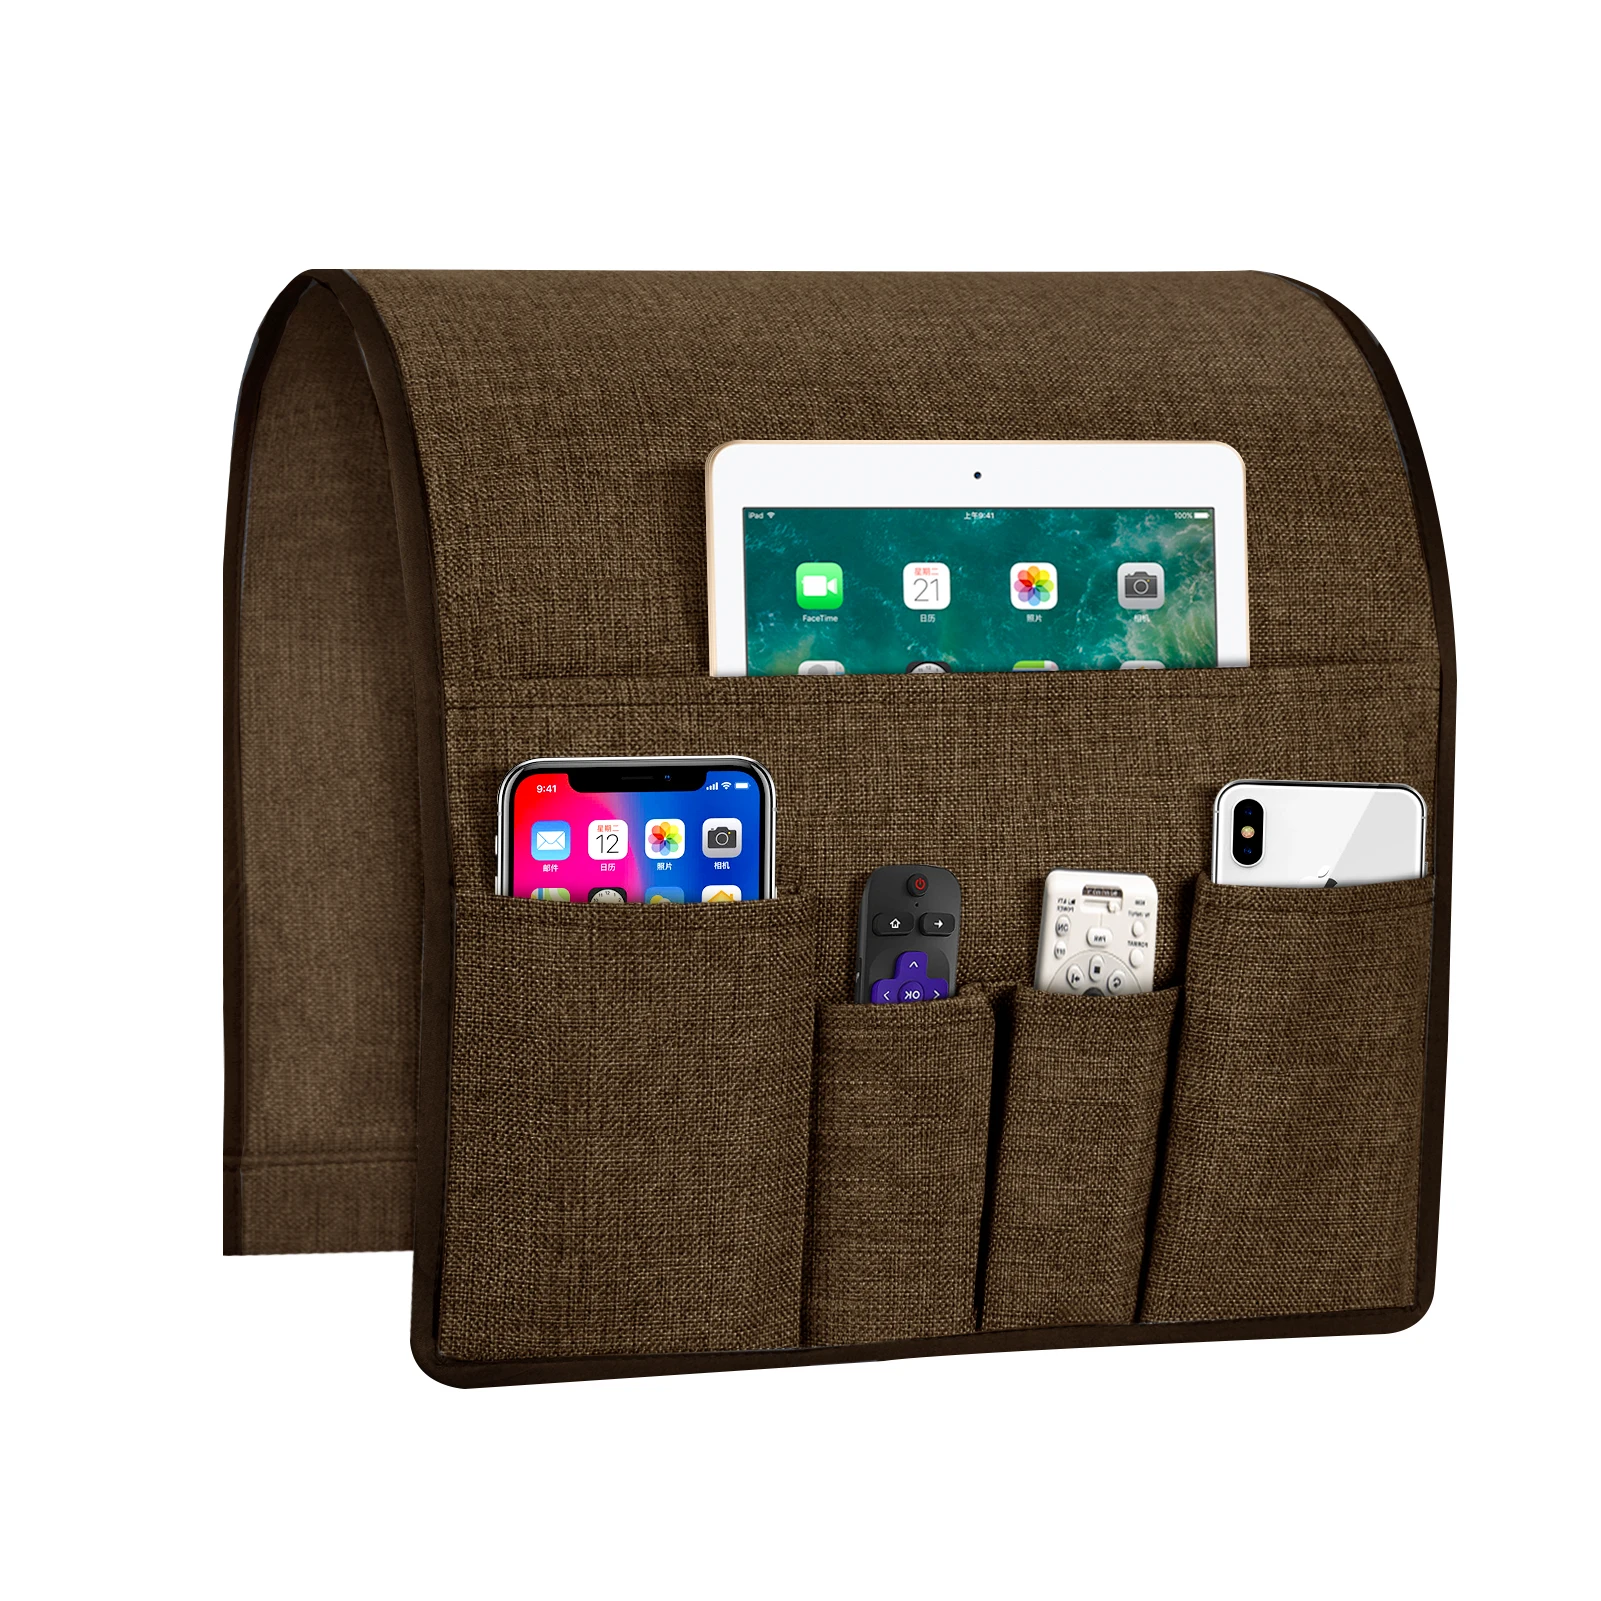 Sofa Organizer for Ipad FOONEE Armrest Organizer with Tray Magazines. Cups,Pens Book Newspaper Remote Game Controller 